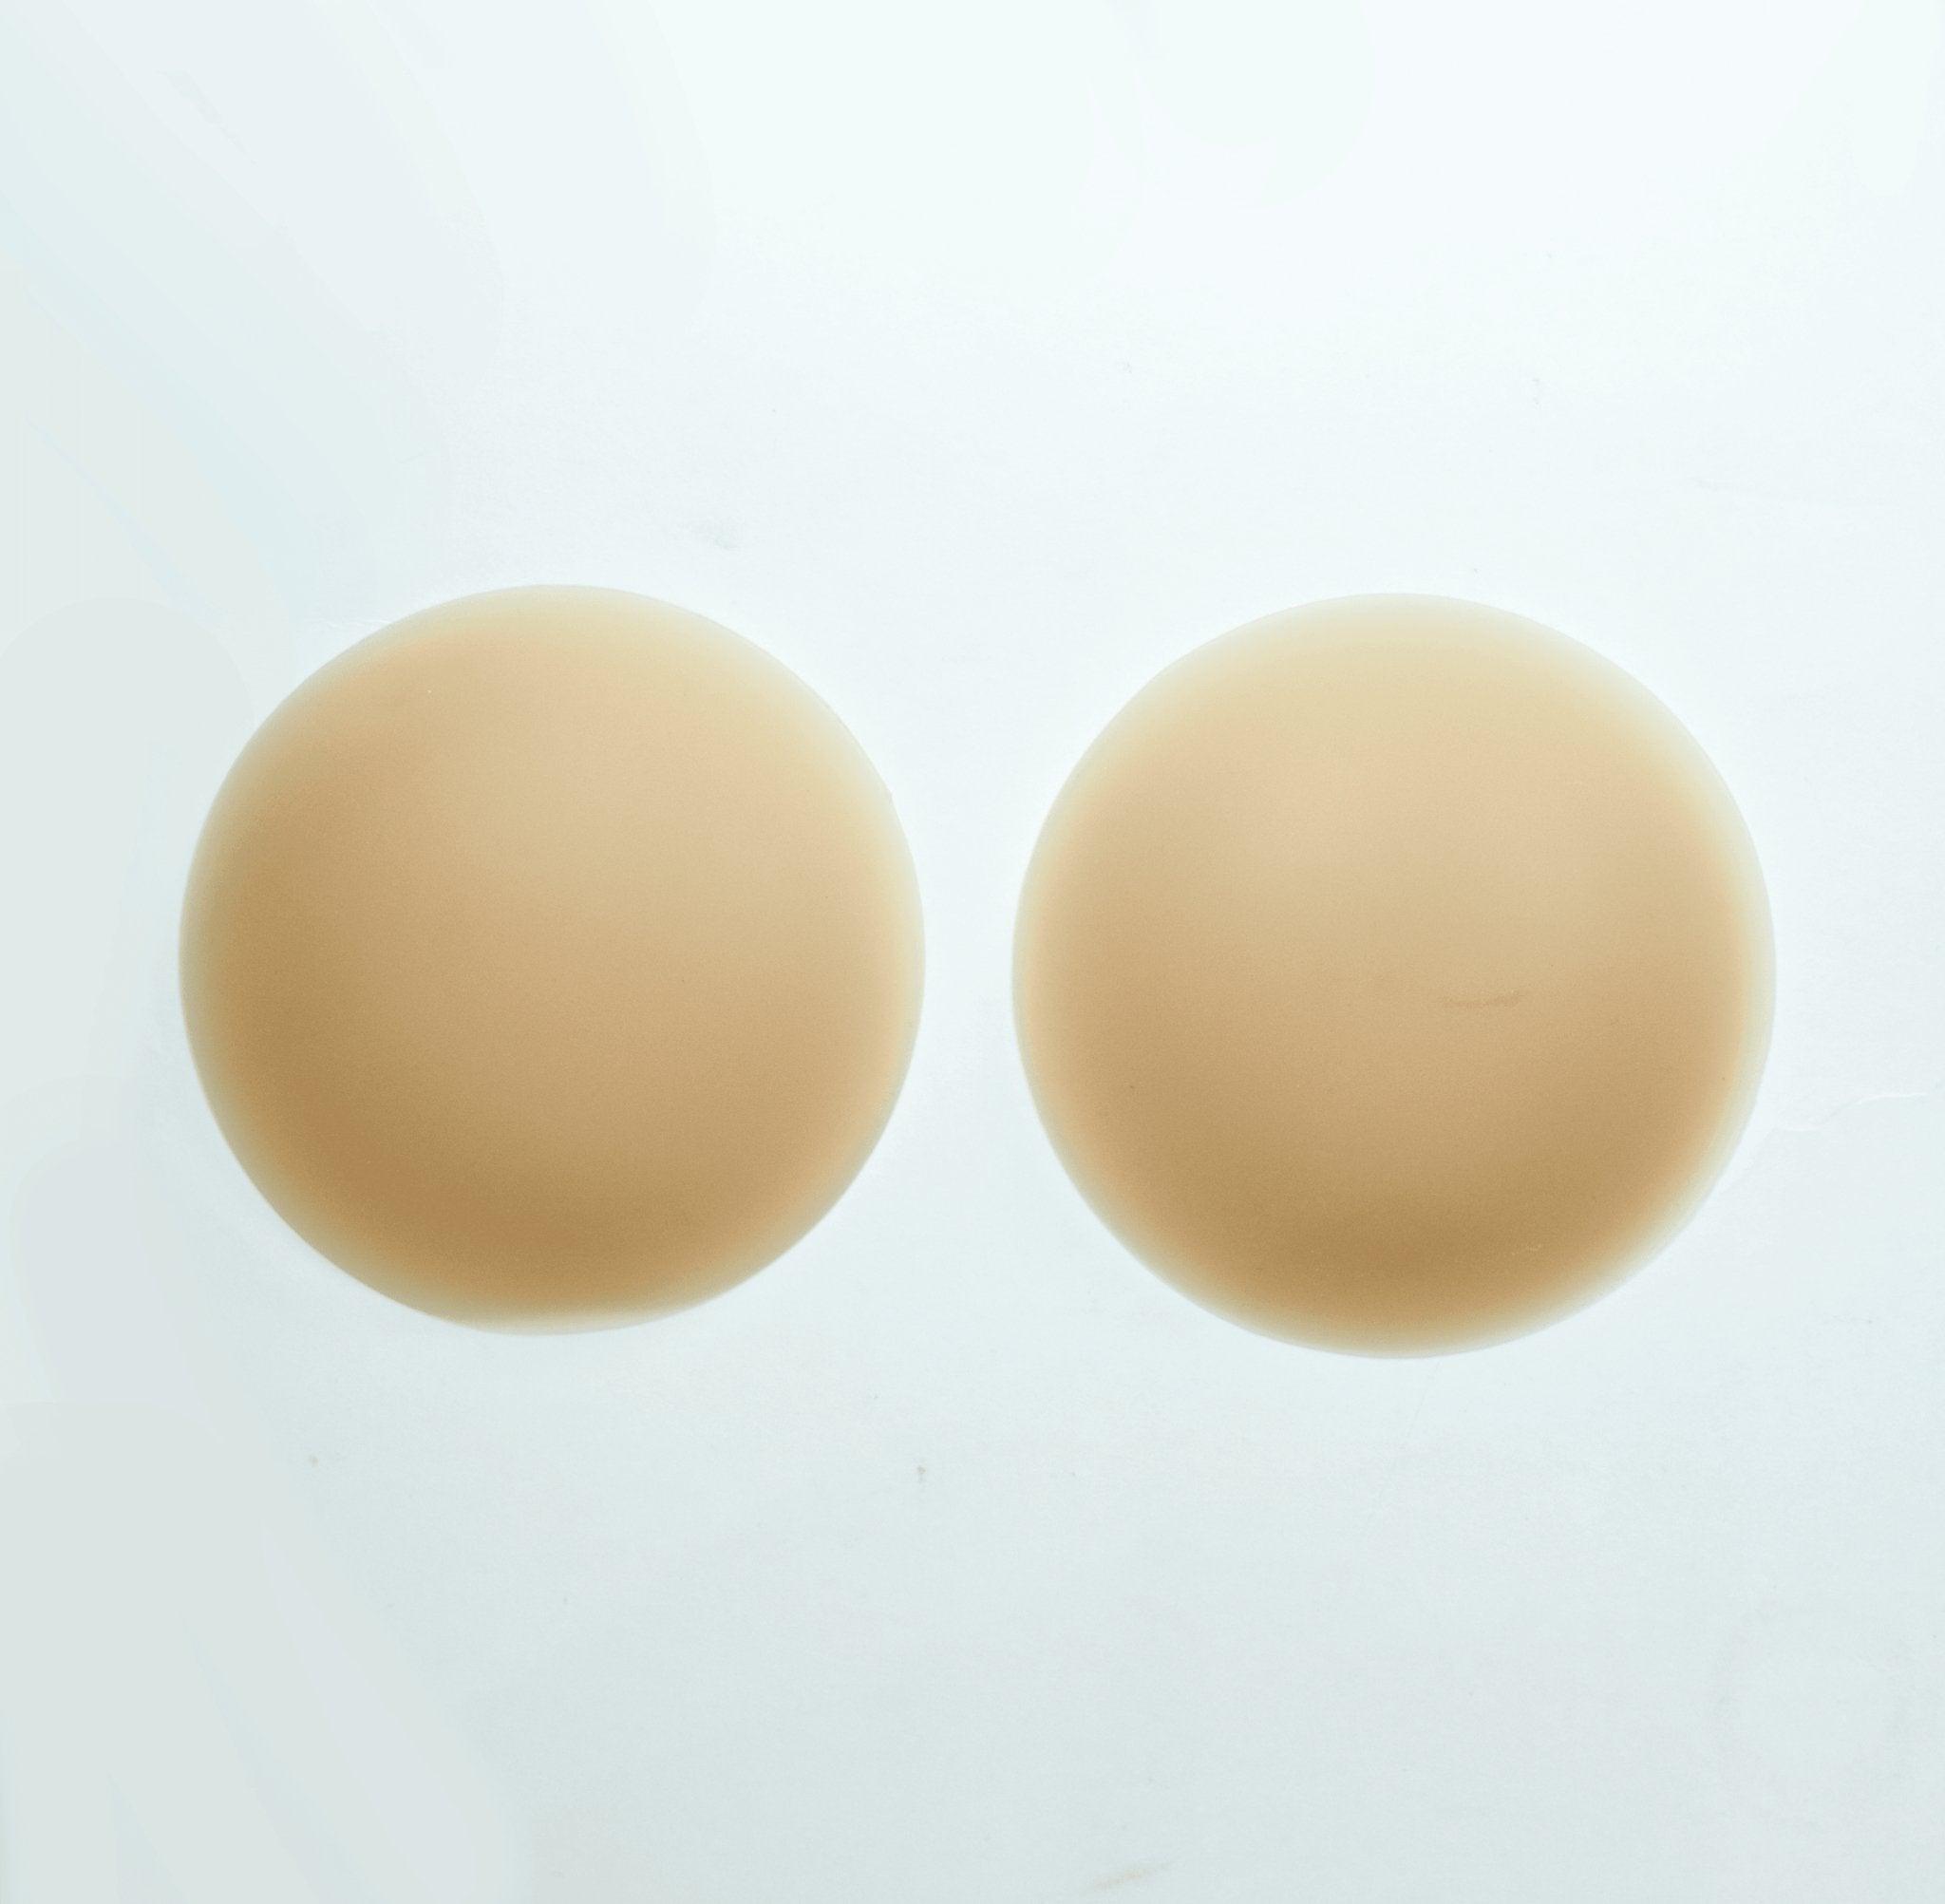 10cm Luxury Non Adhesive Silicone Nipple Covers Ultra Thin